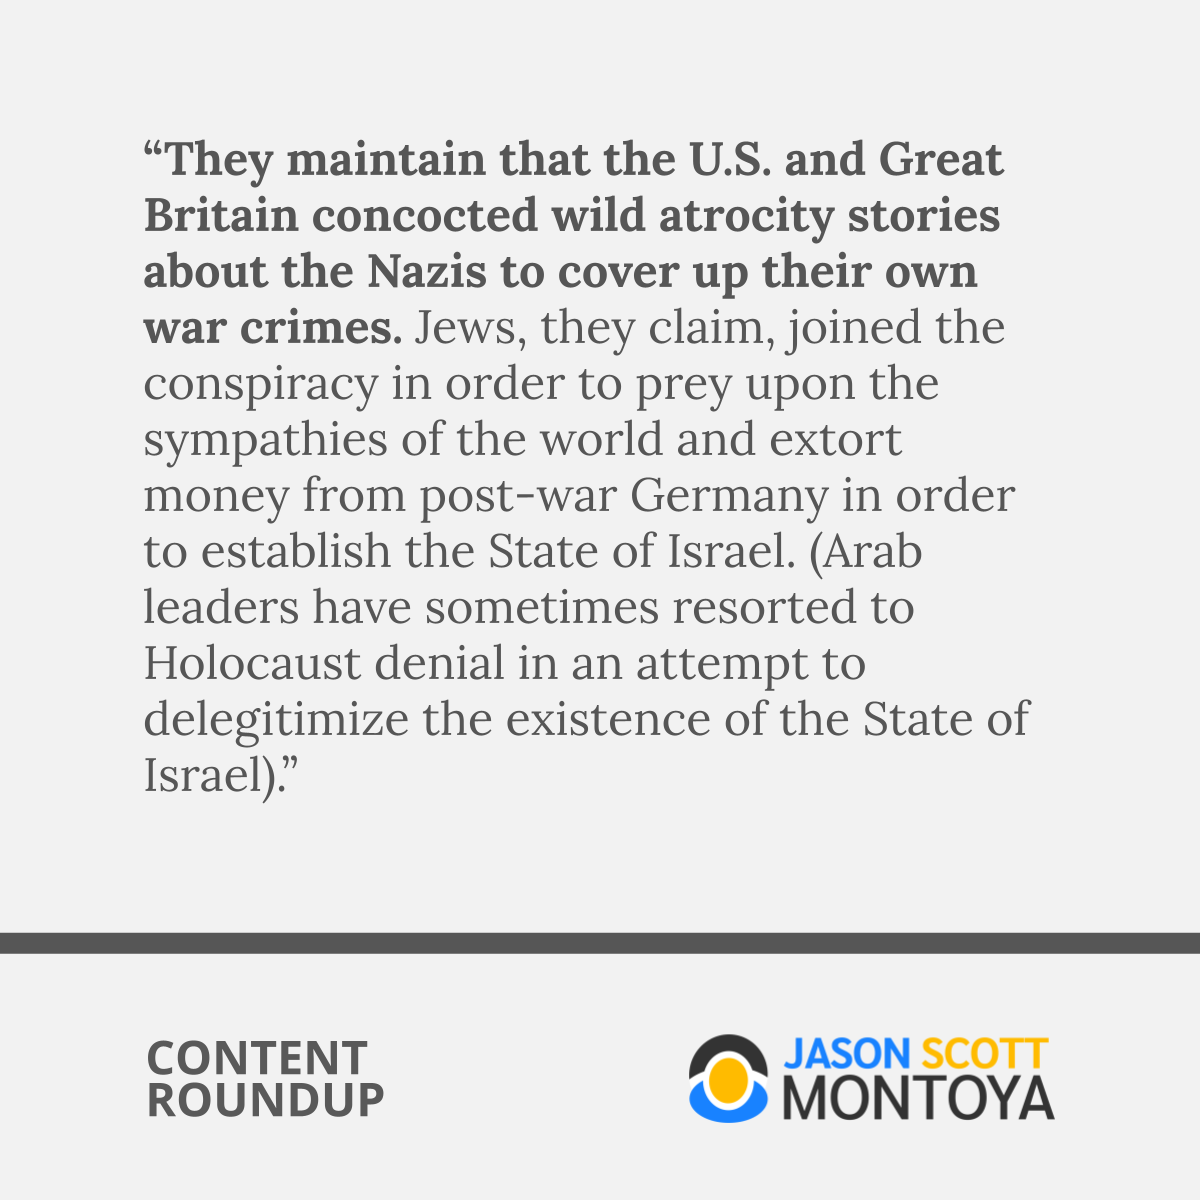 “They maintain that the U.S. and Great Britain concocted wild atrocity stories about the Nazis to cover up their own war crimes. Jews, they claim, joined the conspiracy in order to prey upon the sympathies of the world and extort money from post-war Germany in order to establish the State of Israel. (Arab leaders have sometimes resorted to Holocaust denial in an attempt to delegitimize the existence of the State of Israel).”